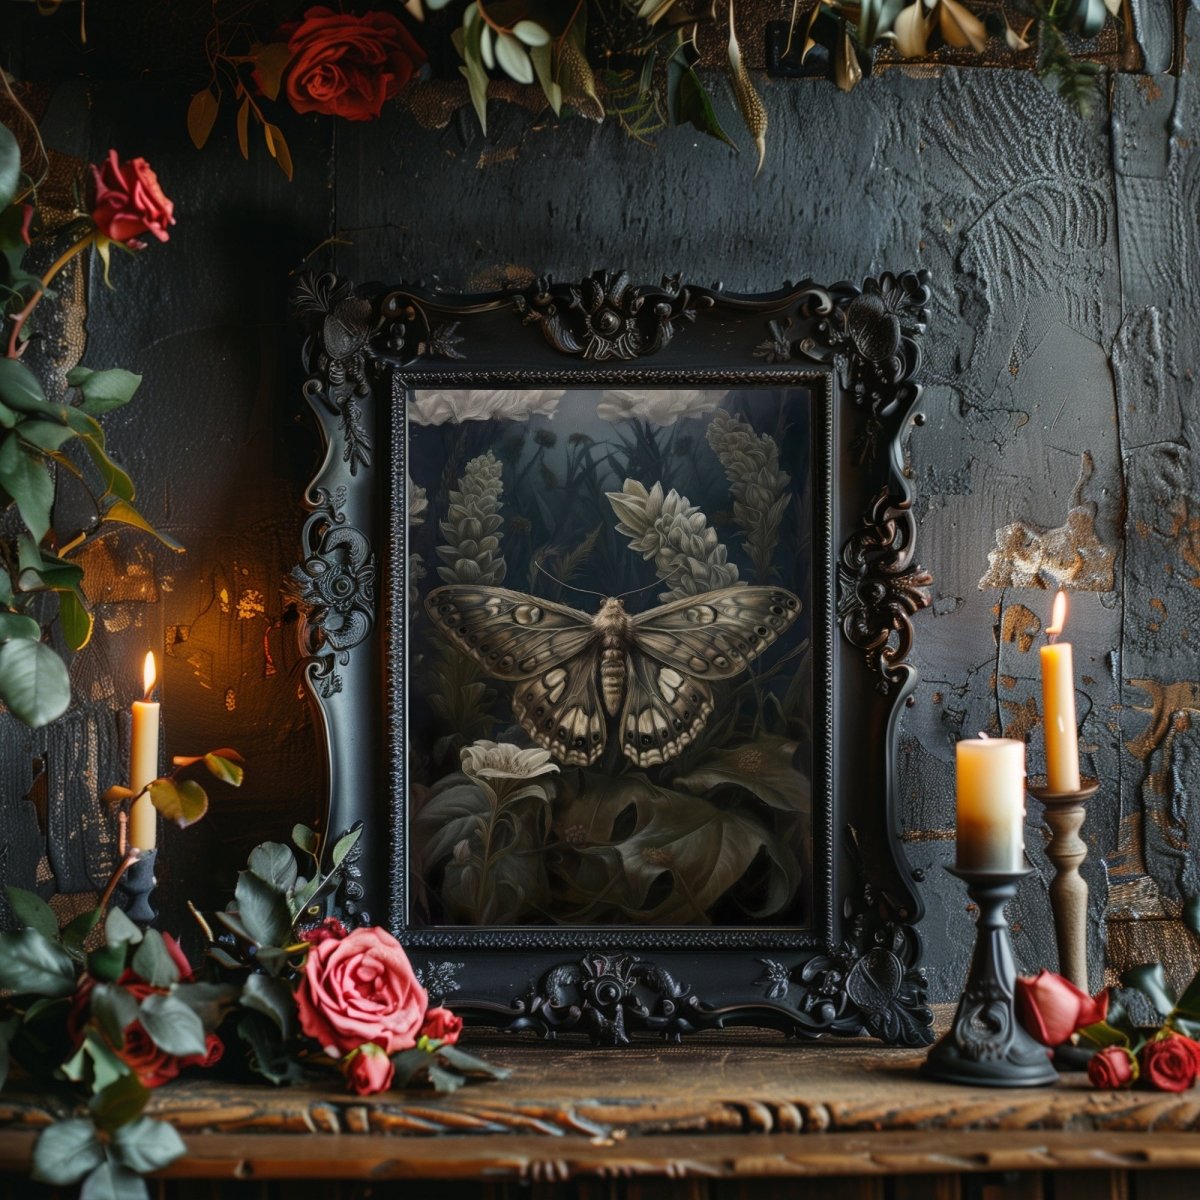 Vintage Moth Painting Wall Art Dark Academia Witchy Gothic Botanical Decor Dark Cottagecore Goblincore Goth Home Decor Paper Poster Prints - Everything Pixel